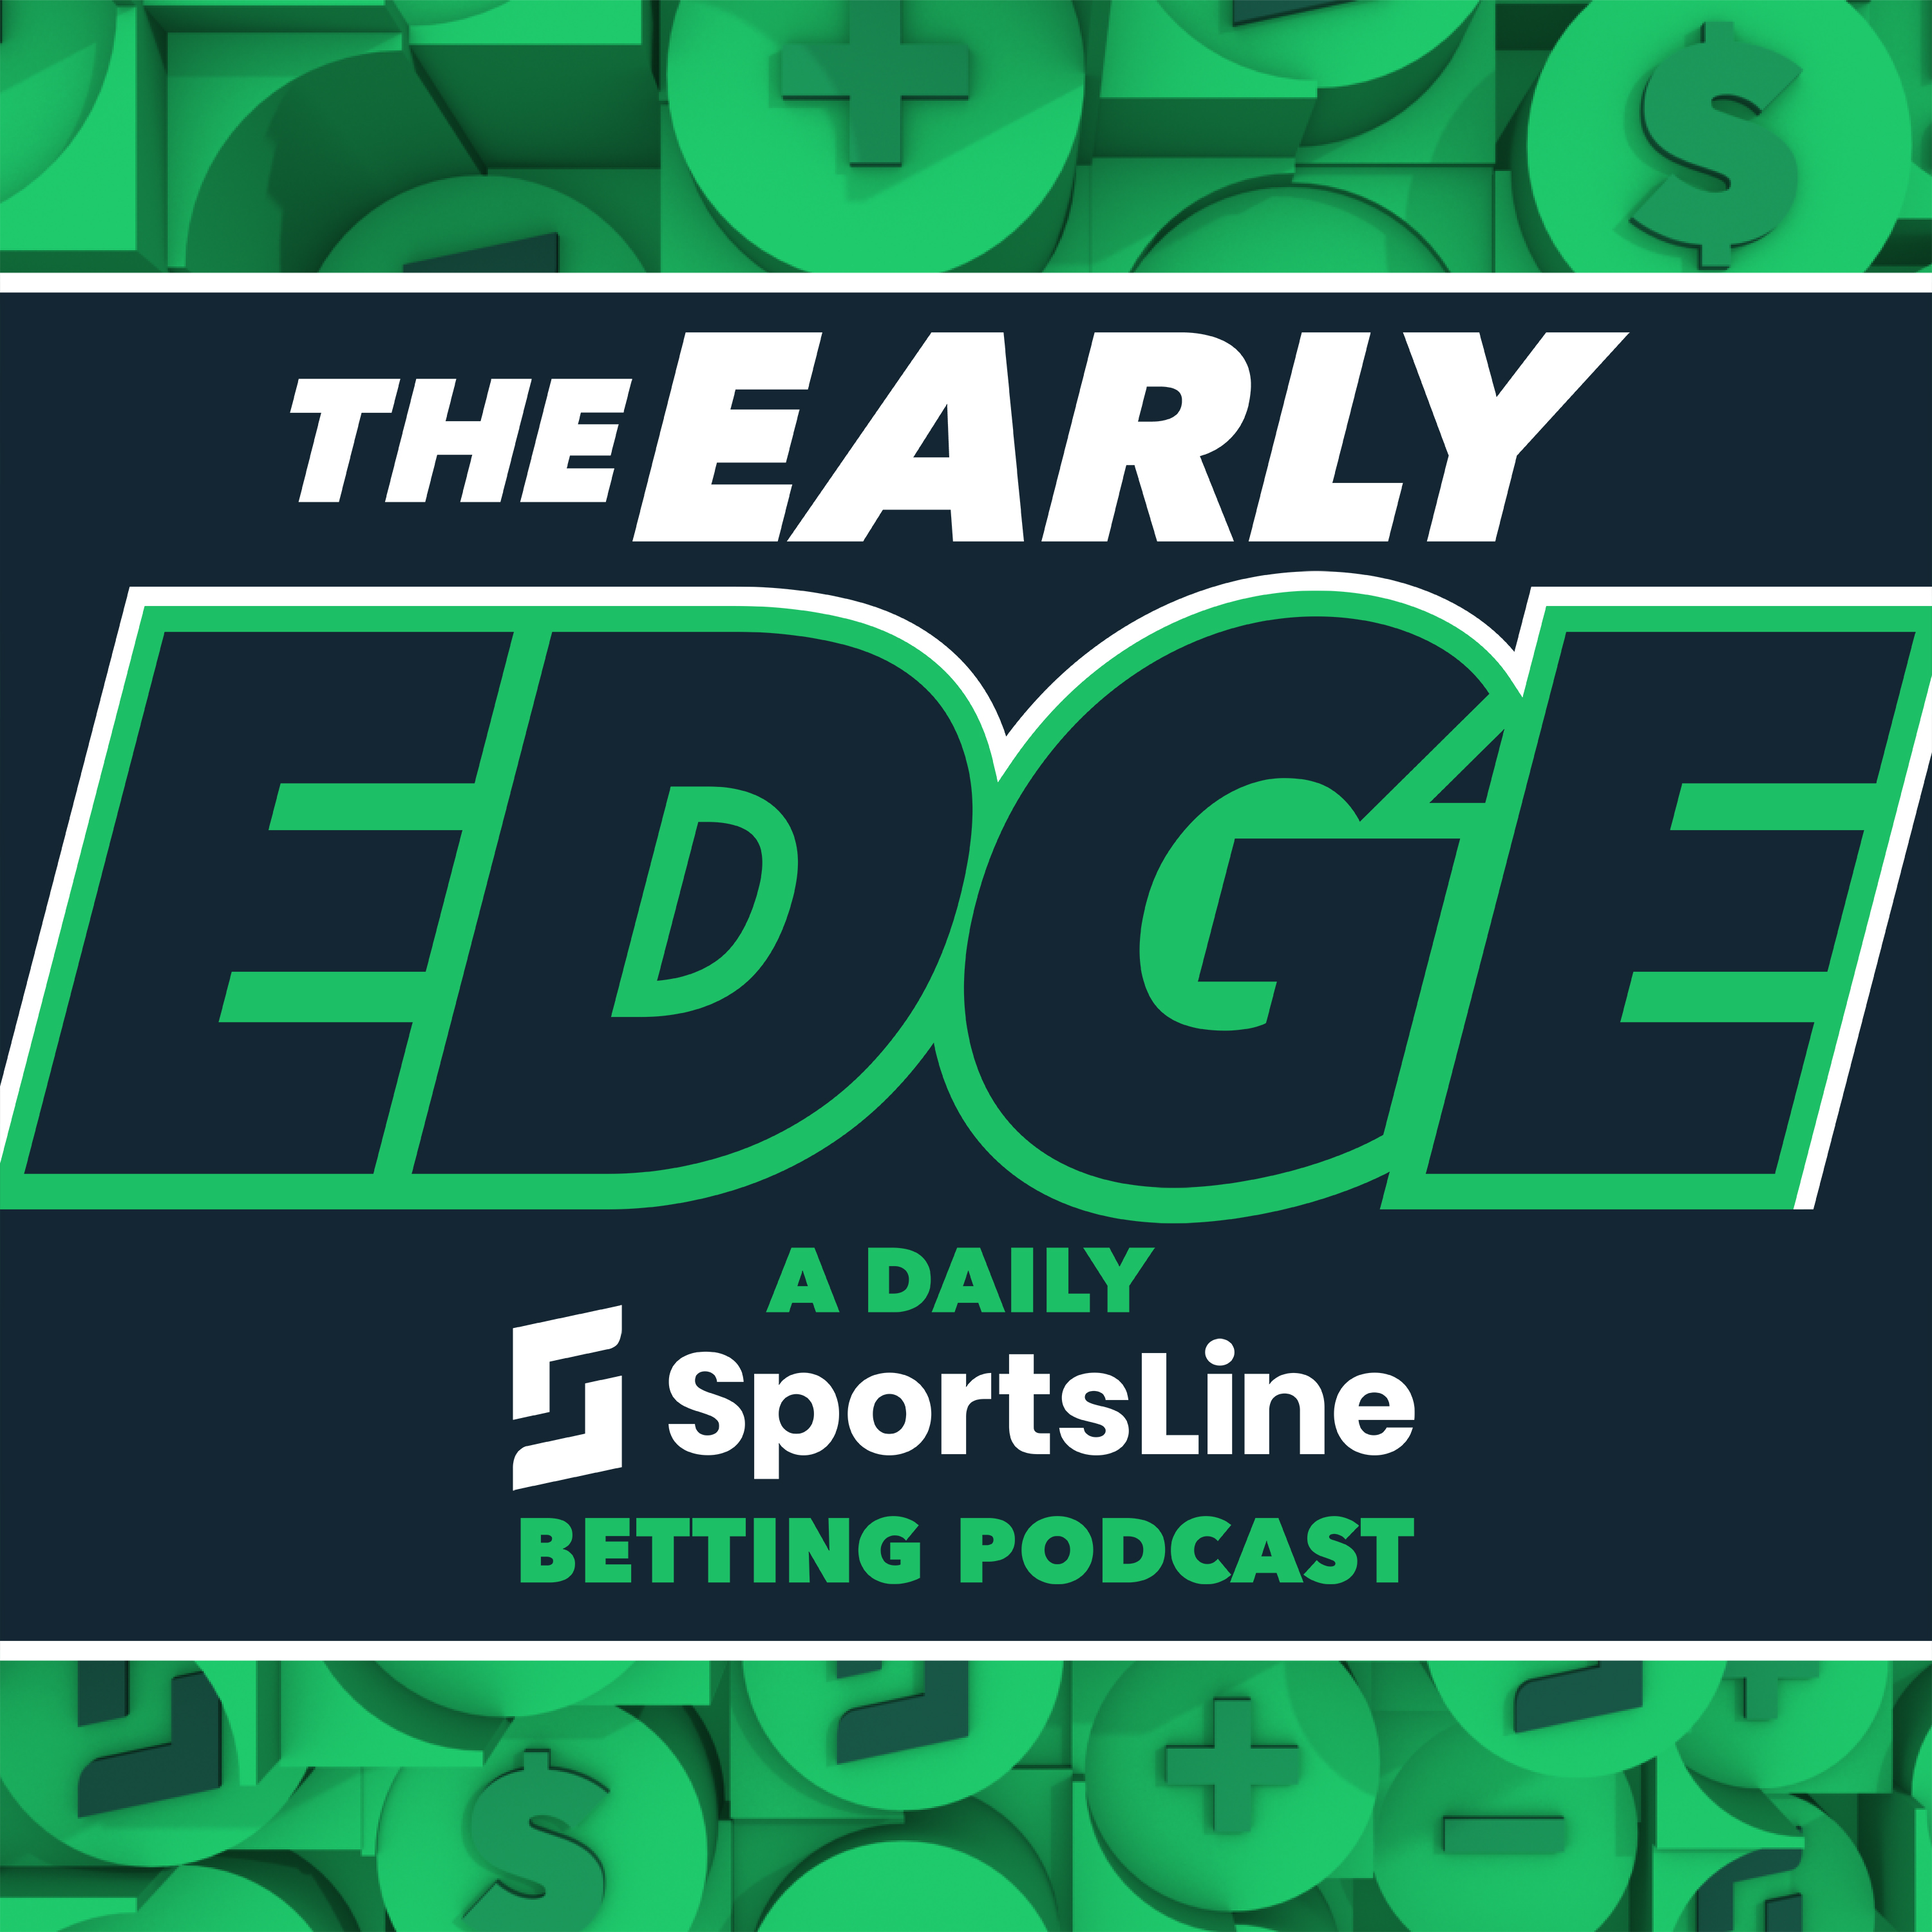 The Early Edge A Daily SportsLine Betting Podcast - CBS Sports Podcasts